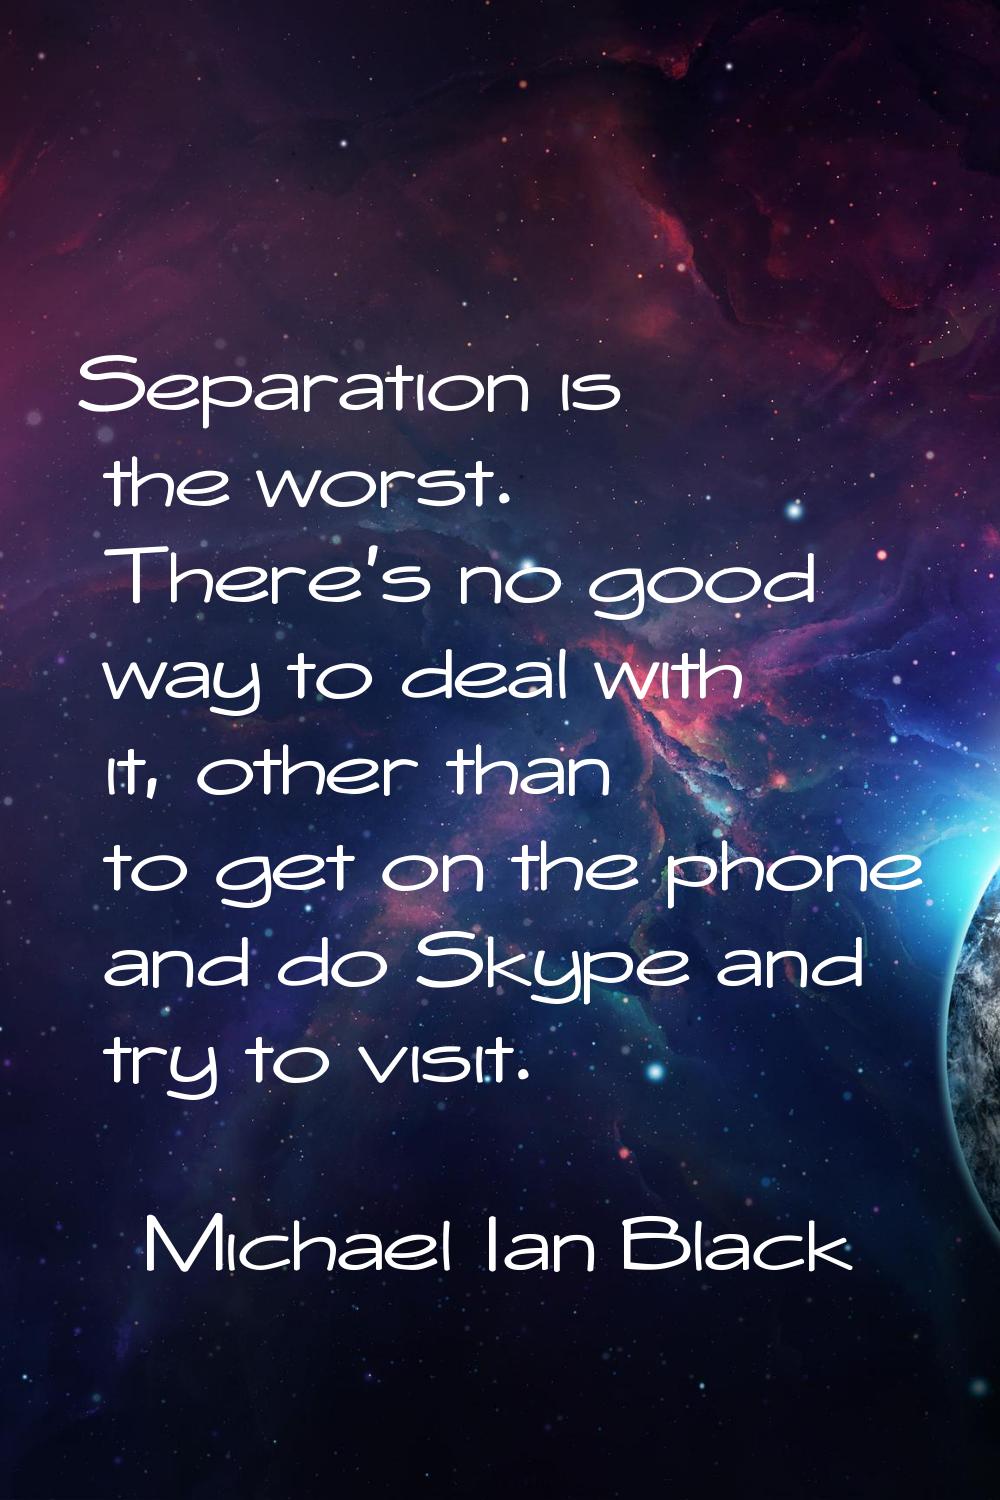 Separation is the worst. There's no good way to deal with it, other than to get on the phone and do